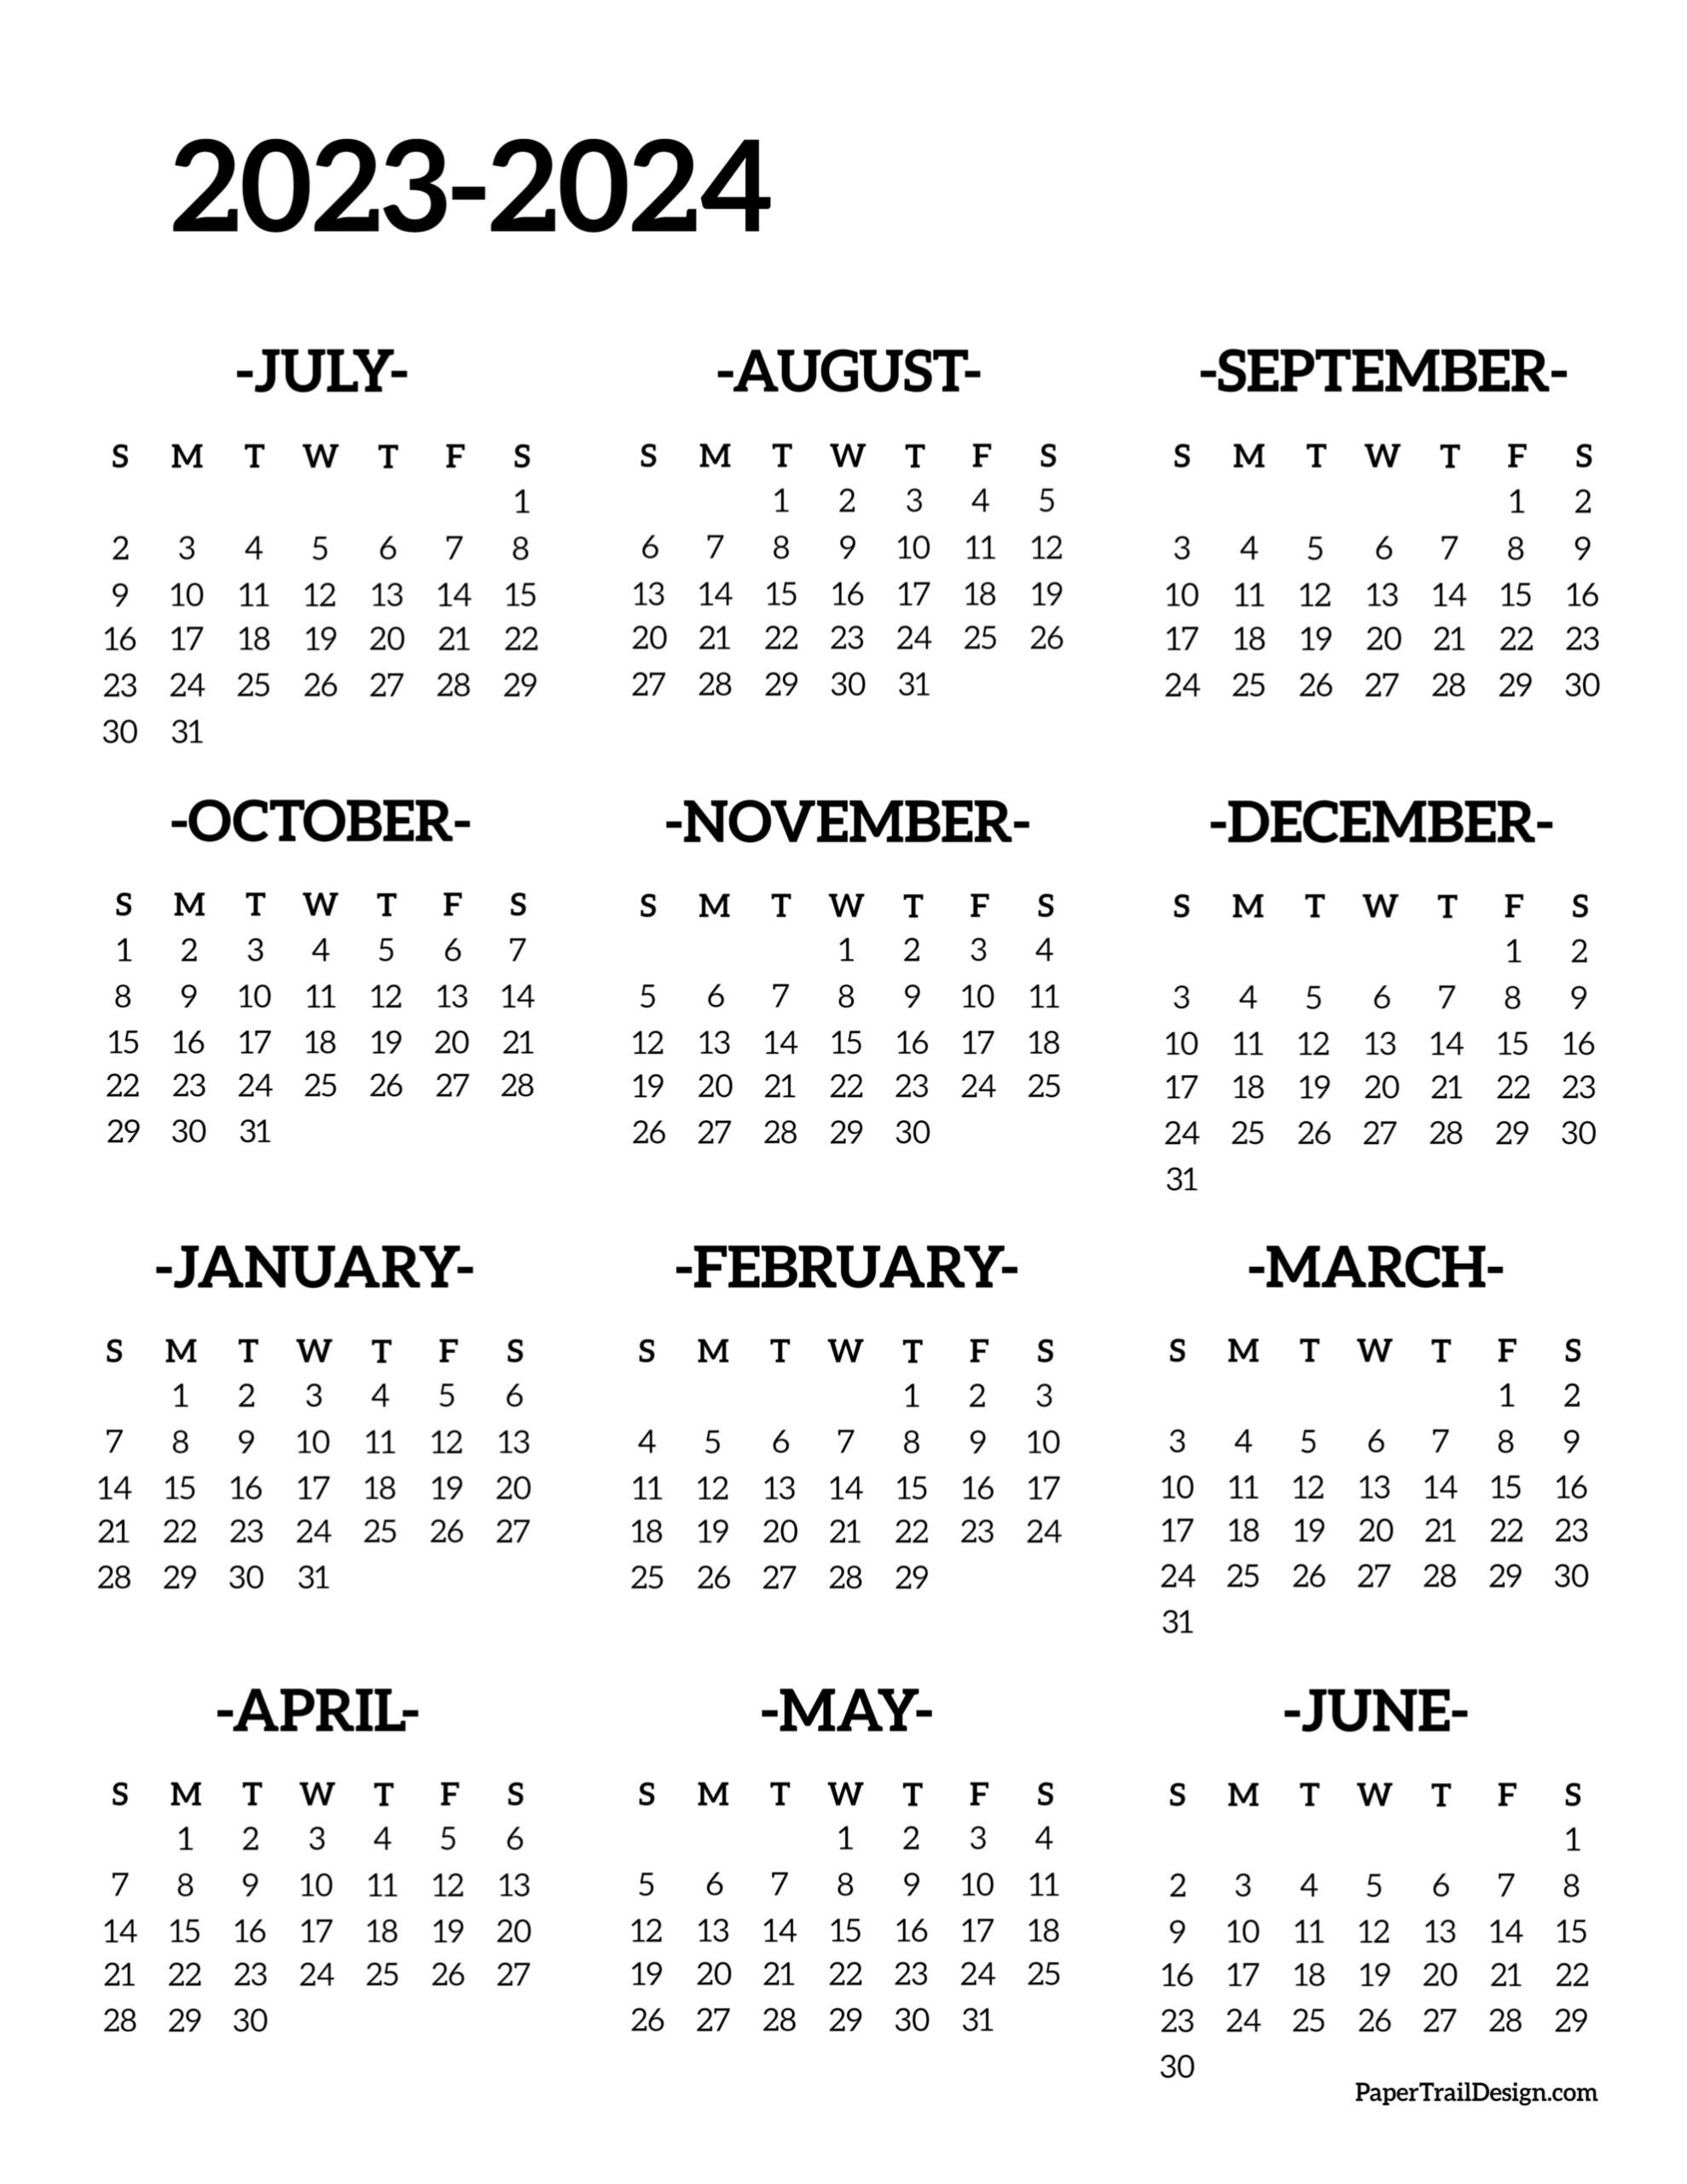 2023-2024 School Year Calendar Free Printable - Paper Trail Design for Printable Monthly Calendar 2023 And 2024